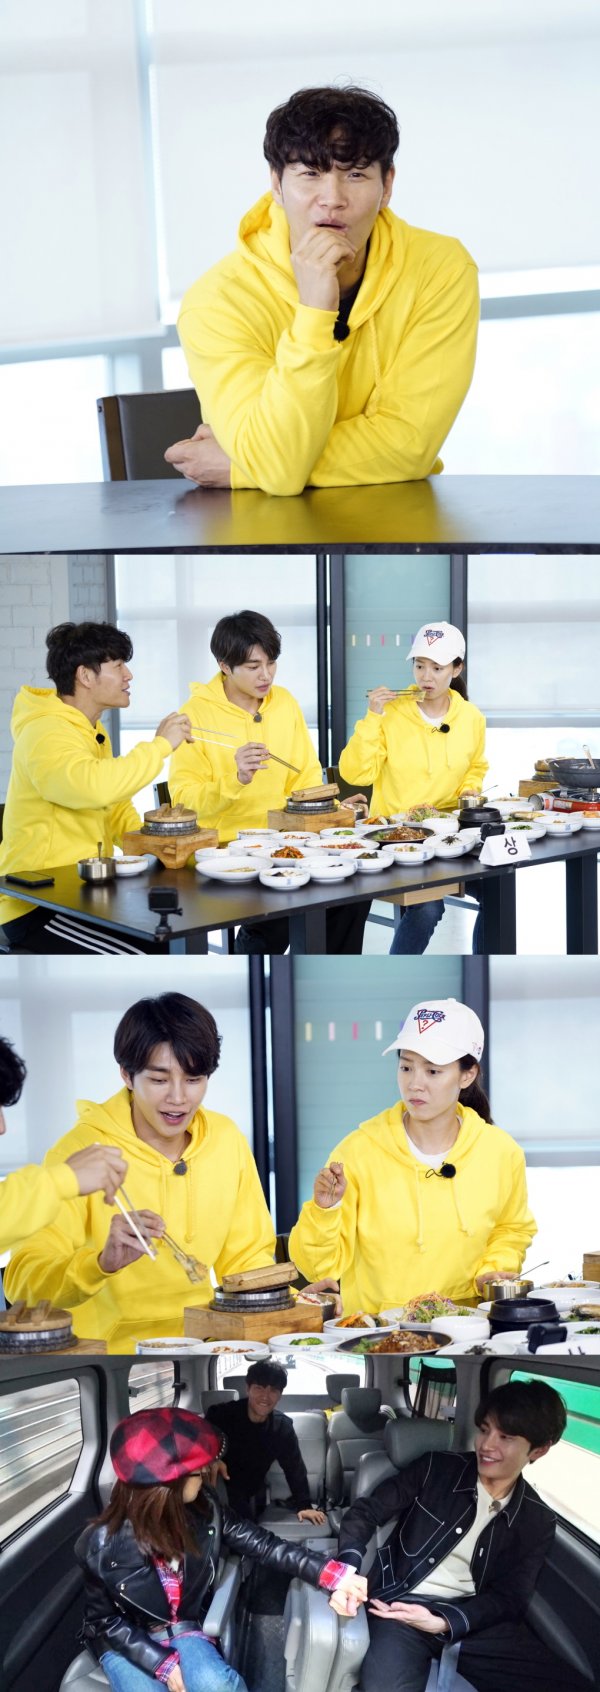 On SBS Running Man, which will be broadcast on the 31st, the subtle atmosphere of Kim Jong-kook X Song Ji-hyo, which is one step closer to the Honey incident, is drawn.The recent recording of Running Man was held as a race to find a secret couple who had infiltrated solo members.The members began to reason for a secret couple pretending to be solo with all their touch, and Kim Jong-kook cited Song Ji-hyo as a candidate for a secret couple and Jae-young Kim, a model who appeared as a guest.In particular, Kim Jong-kook continued to point out the familiarity of Jae-young Kim and Song Ji-hyo, unlike other members who suspected several people, and drove them into a secret couple.Kim Jong-kook strongly suspected the two as secret couples, testifying that Song Ji-hyo had talked to Jae-young Kim comfortably and had even grabbed his hand.Song Ji-hyo insisted on innocence and said, If I am not a secret couple, Kim Jong-kook is jealous now. Other members also added that Kim Jong-kooks attitude was jealous.Guest Jang Hee-jin said Kim Jong-kook is a little scary, and Song Ji-hyo said, Its a good person to know. The subtle sluggish situation of Running Man Monday Couple was produced.Meanwhile, the entire story of the subtle love line can be found on Running Man, which will be broadcast at 5 pm tomorrow (31st).